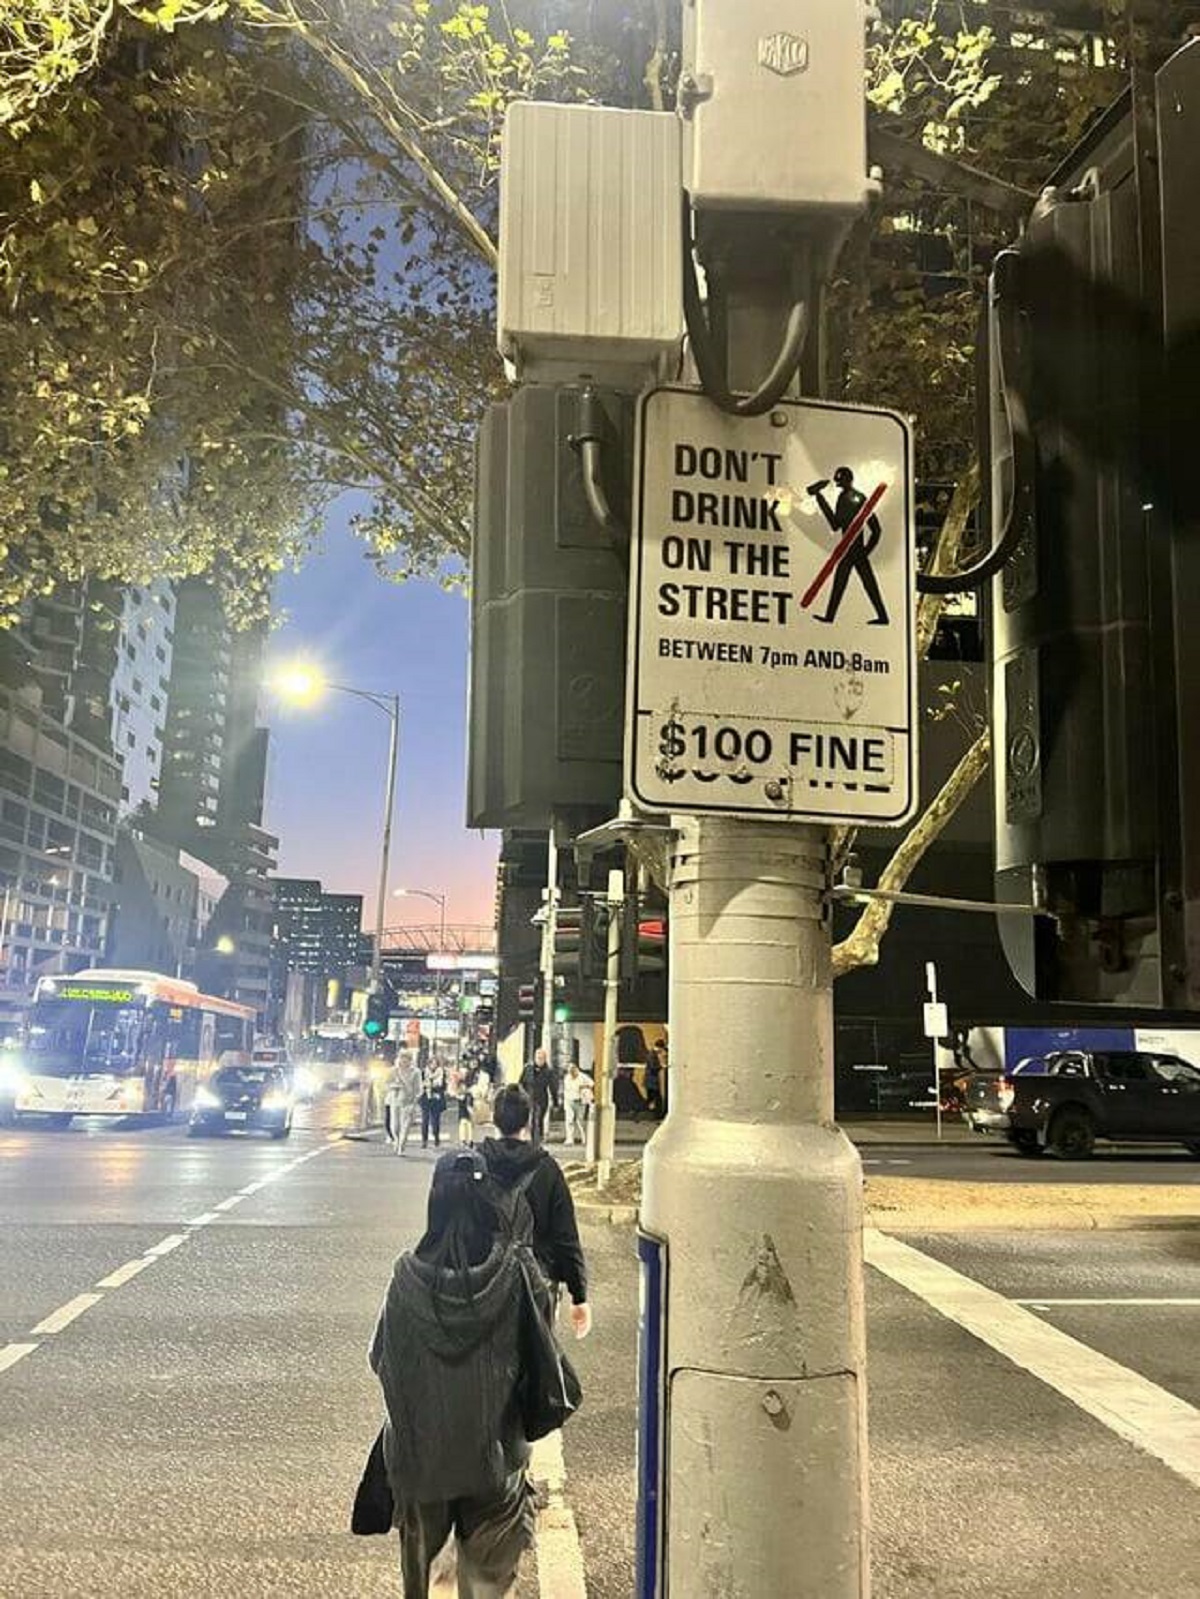 "You can only drink booze on the streets in Melbourne during the daytime"